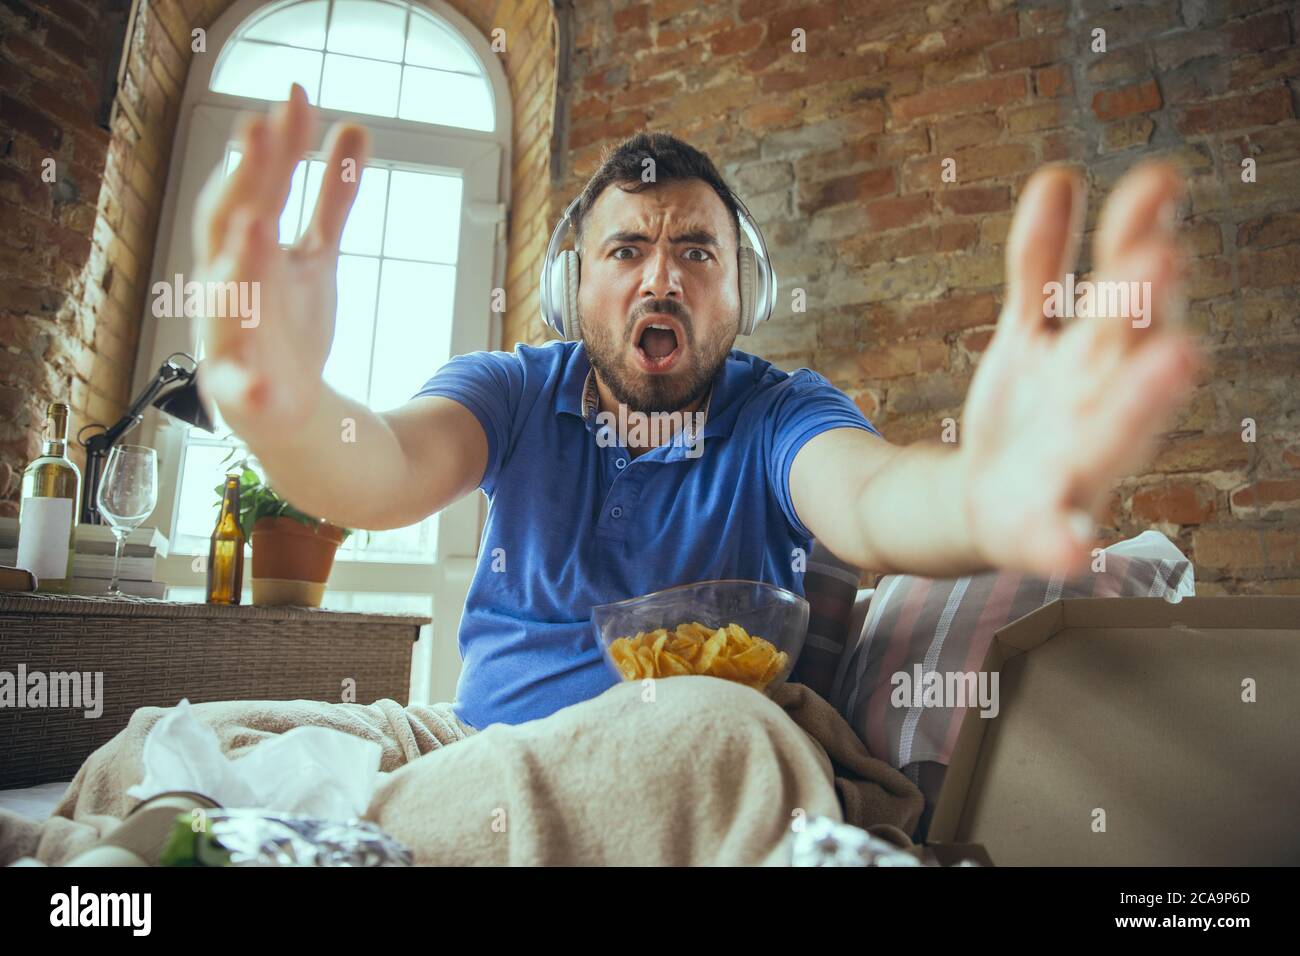 Excited watching match of favourite team. Lazy man living in his bed surrounded with messy. No need to go out to be happy. Using gadgets, watching movie and series, looks emotional. Fast food. Stock Photo